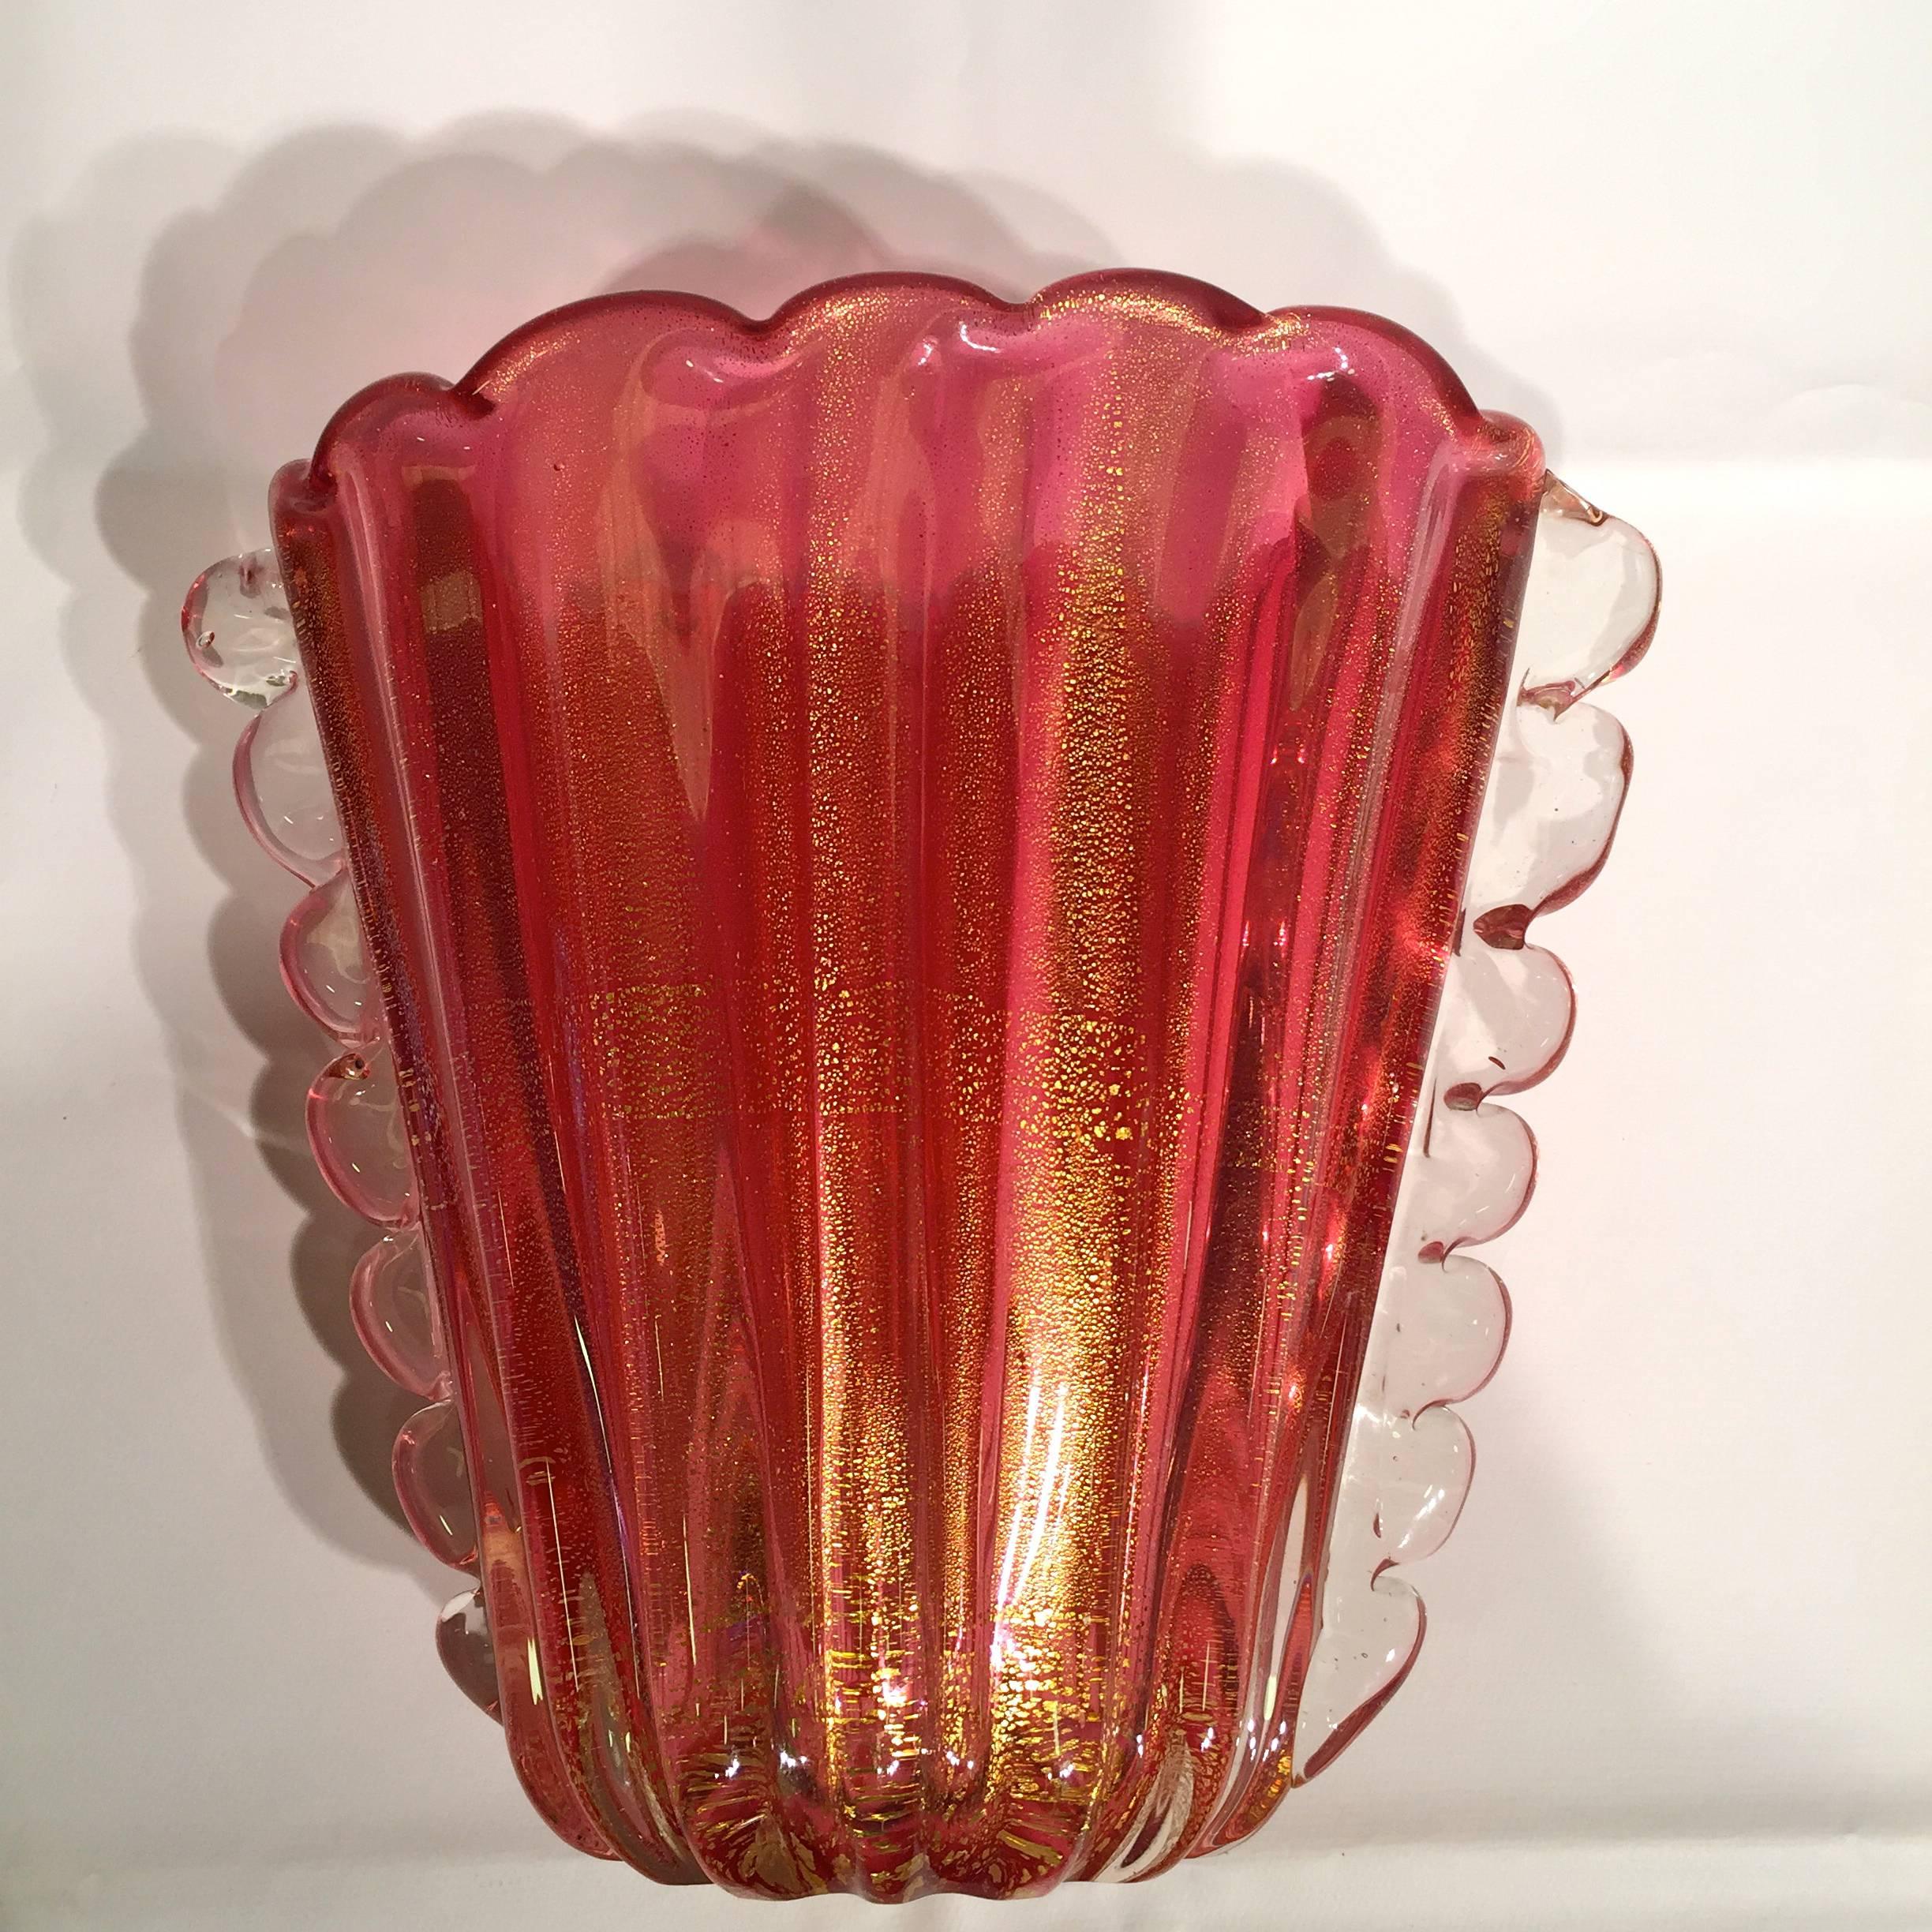 Archimede Seguso, vase in artistic blown glass of Murano with side applications and gold foil.